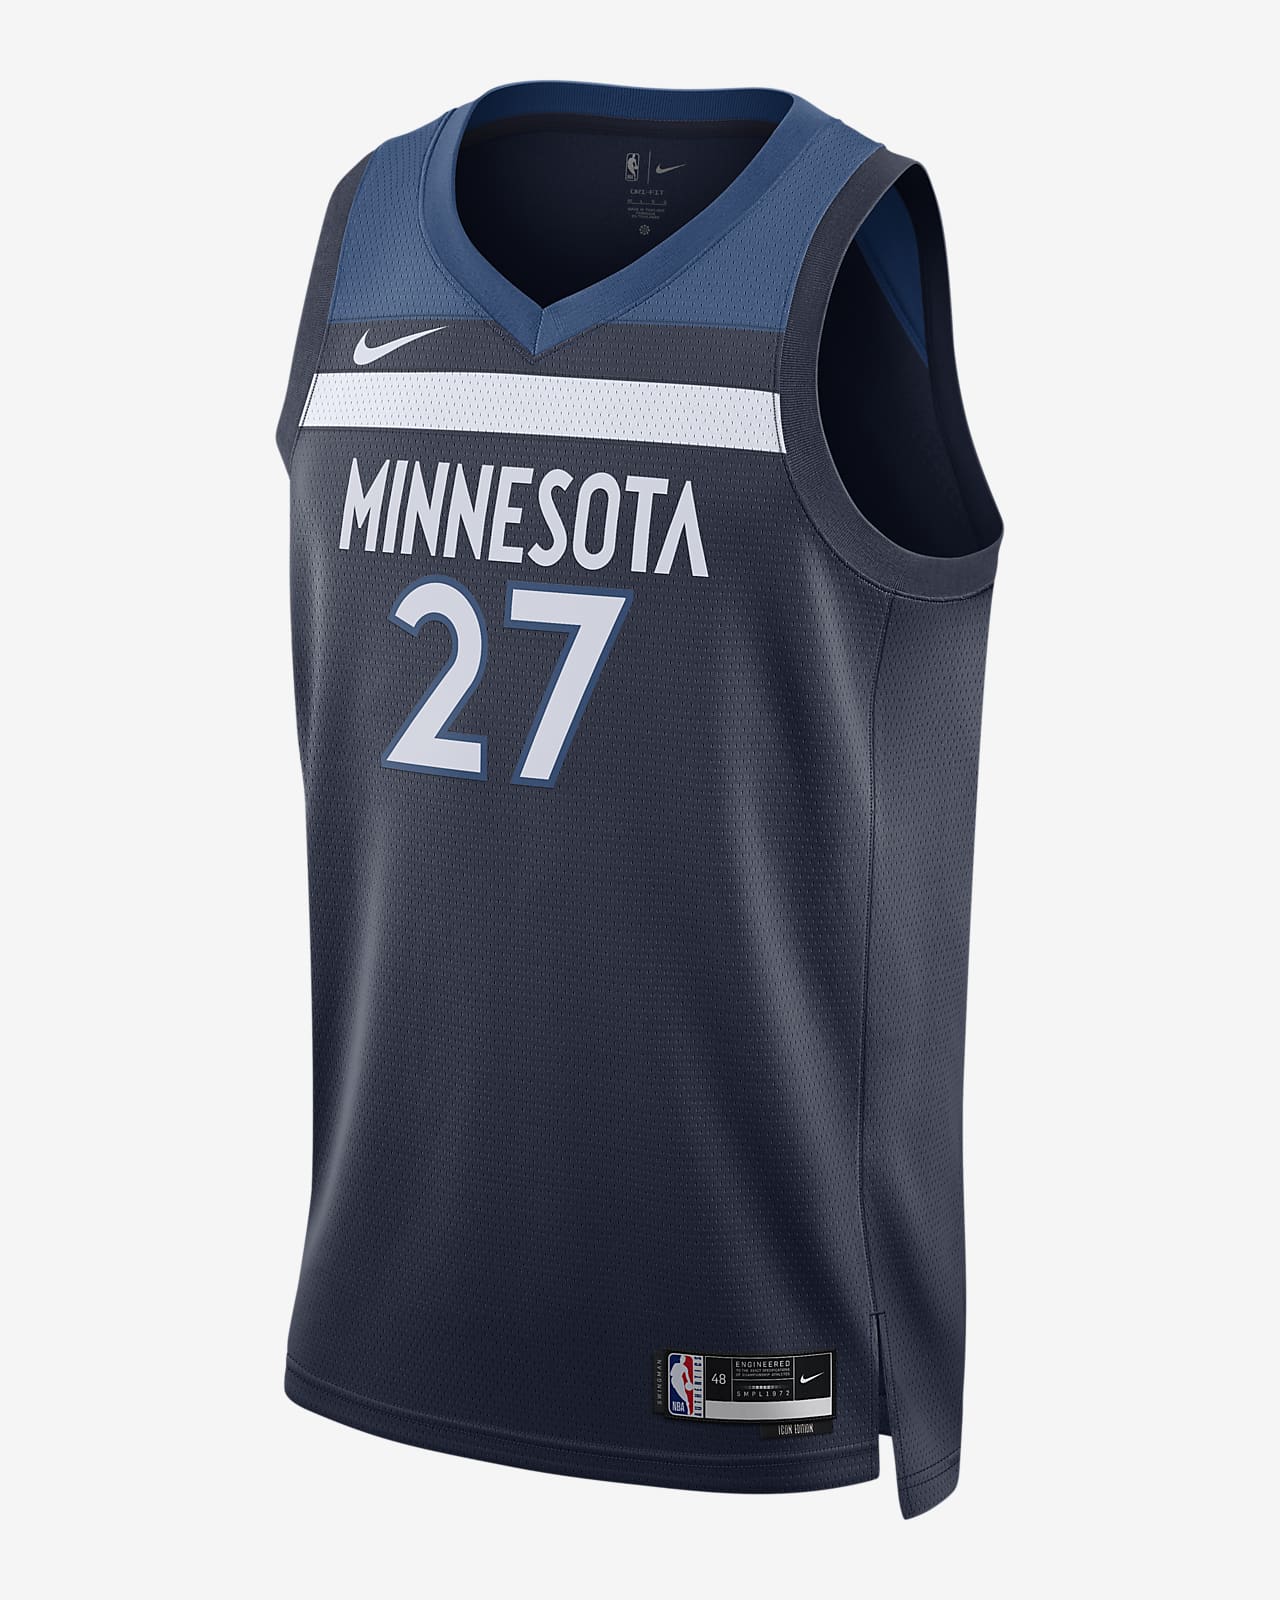 timberwolves jerseys for sale